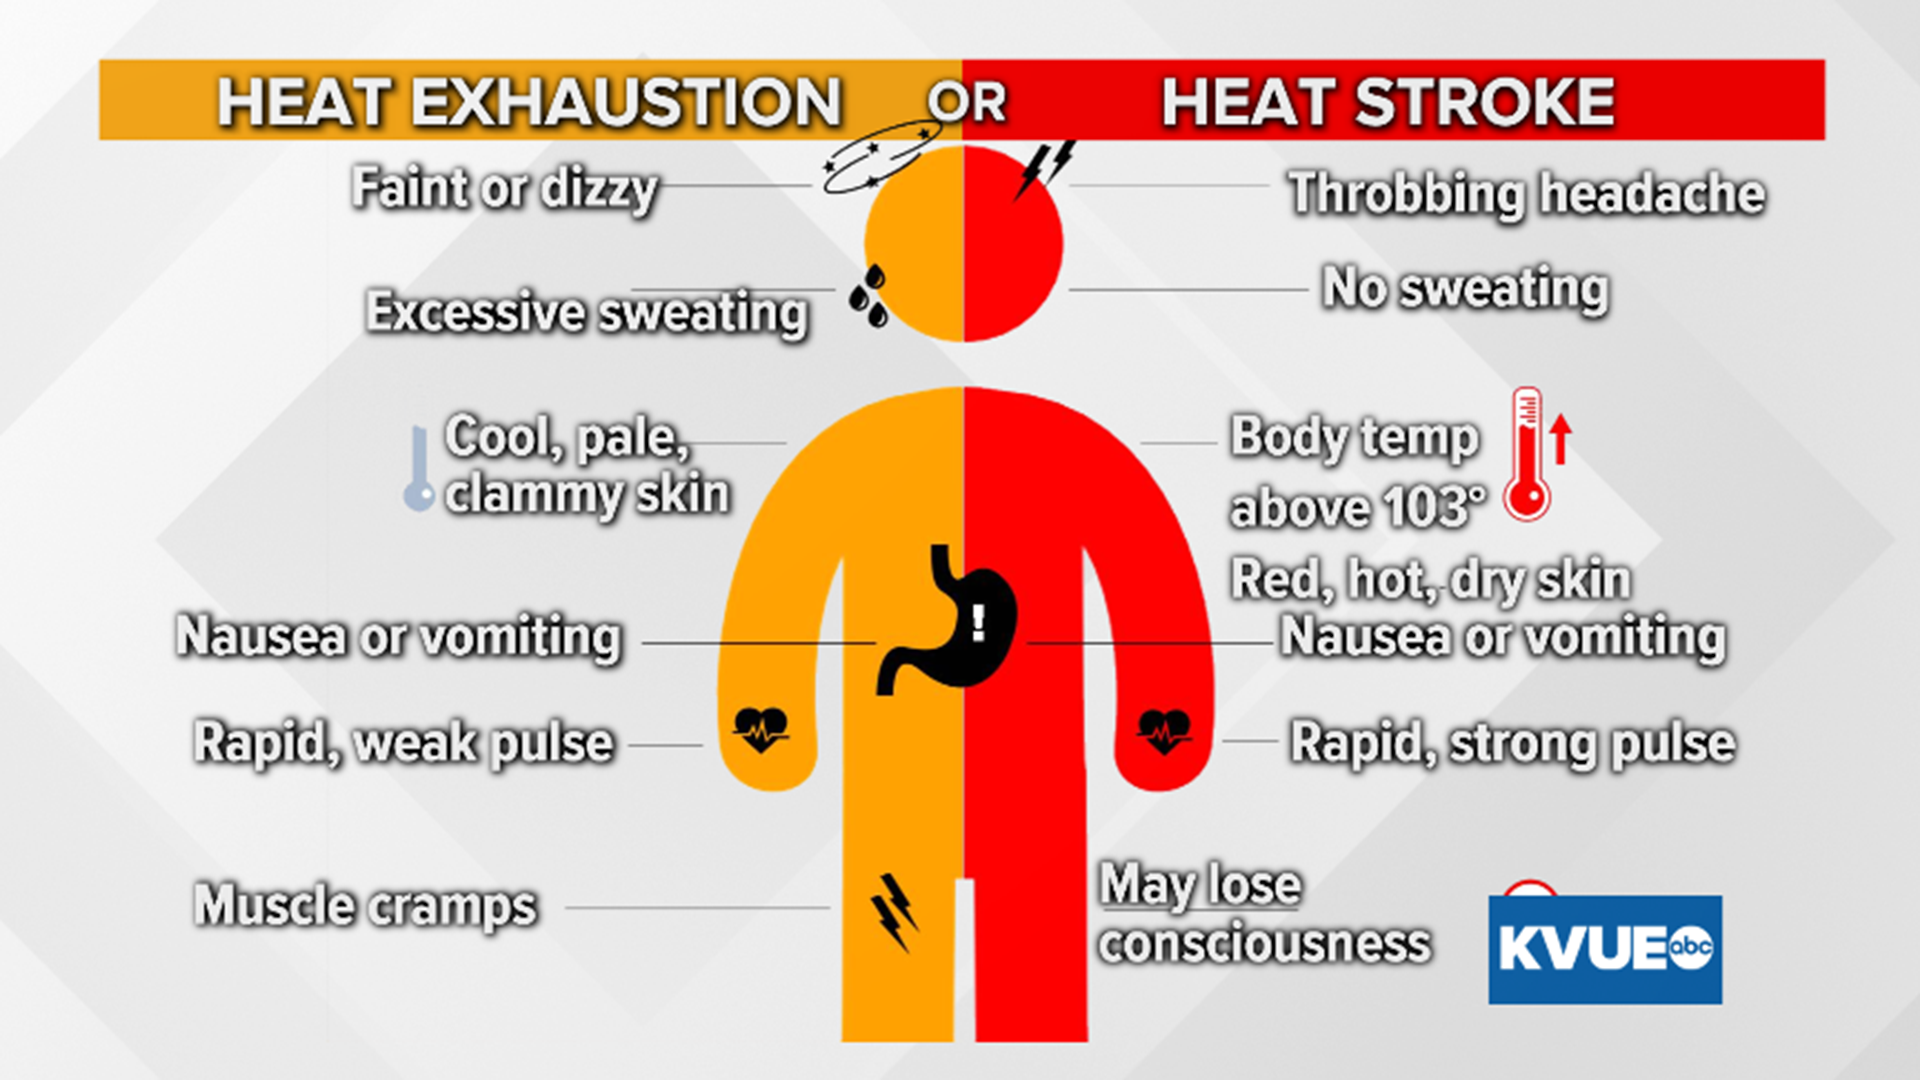 Heat stroke vs. heat exhaustion Know the warning signs